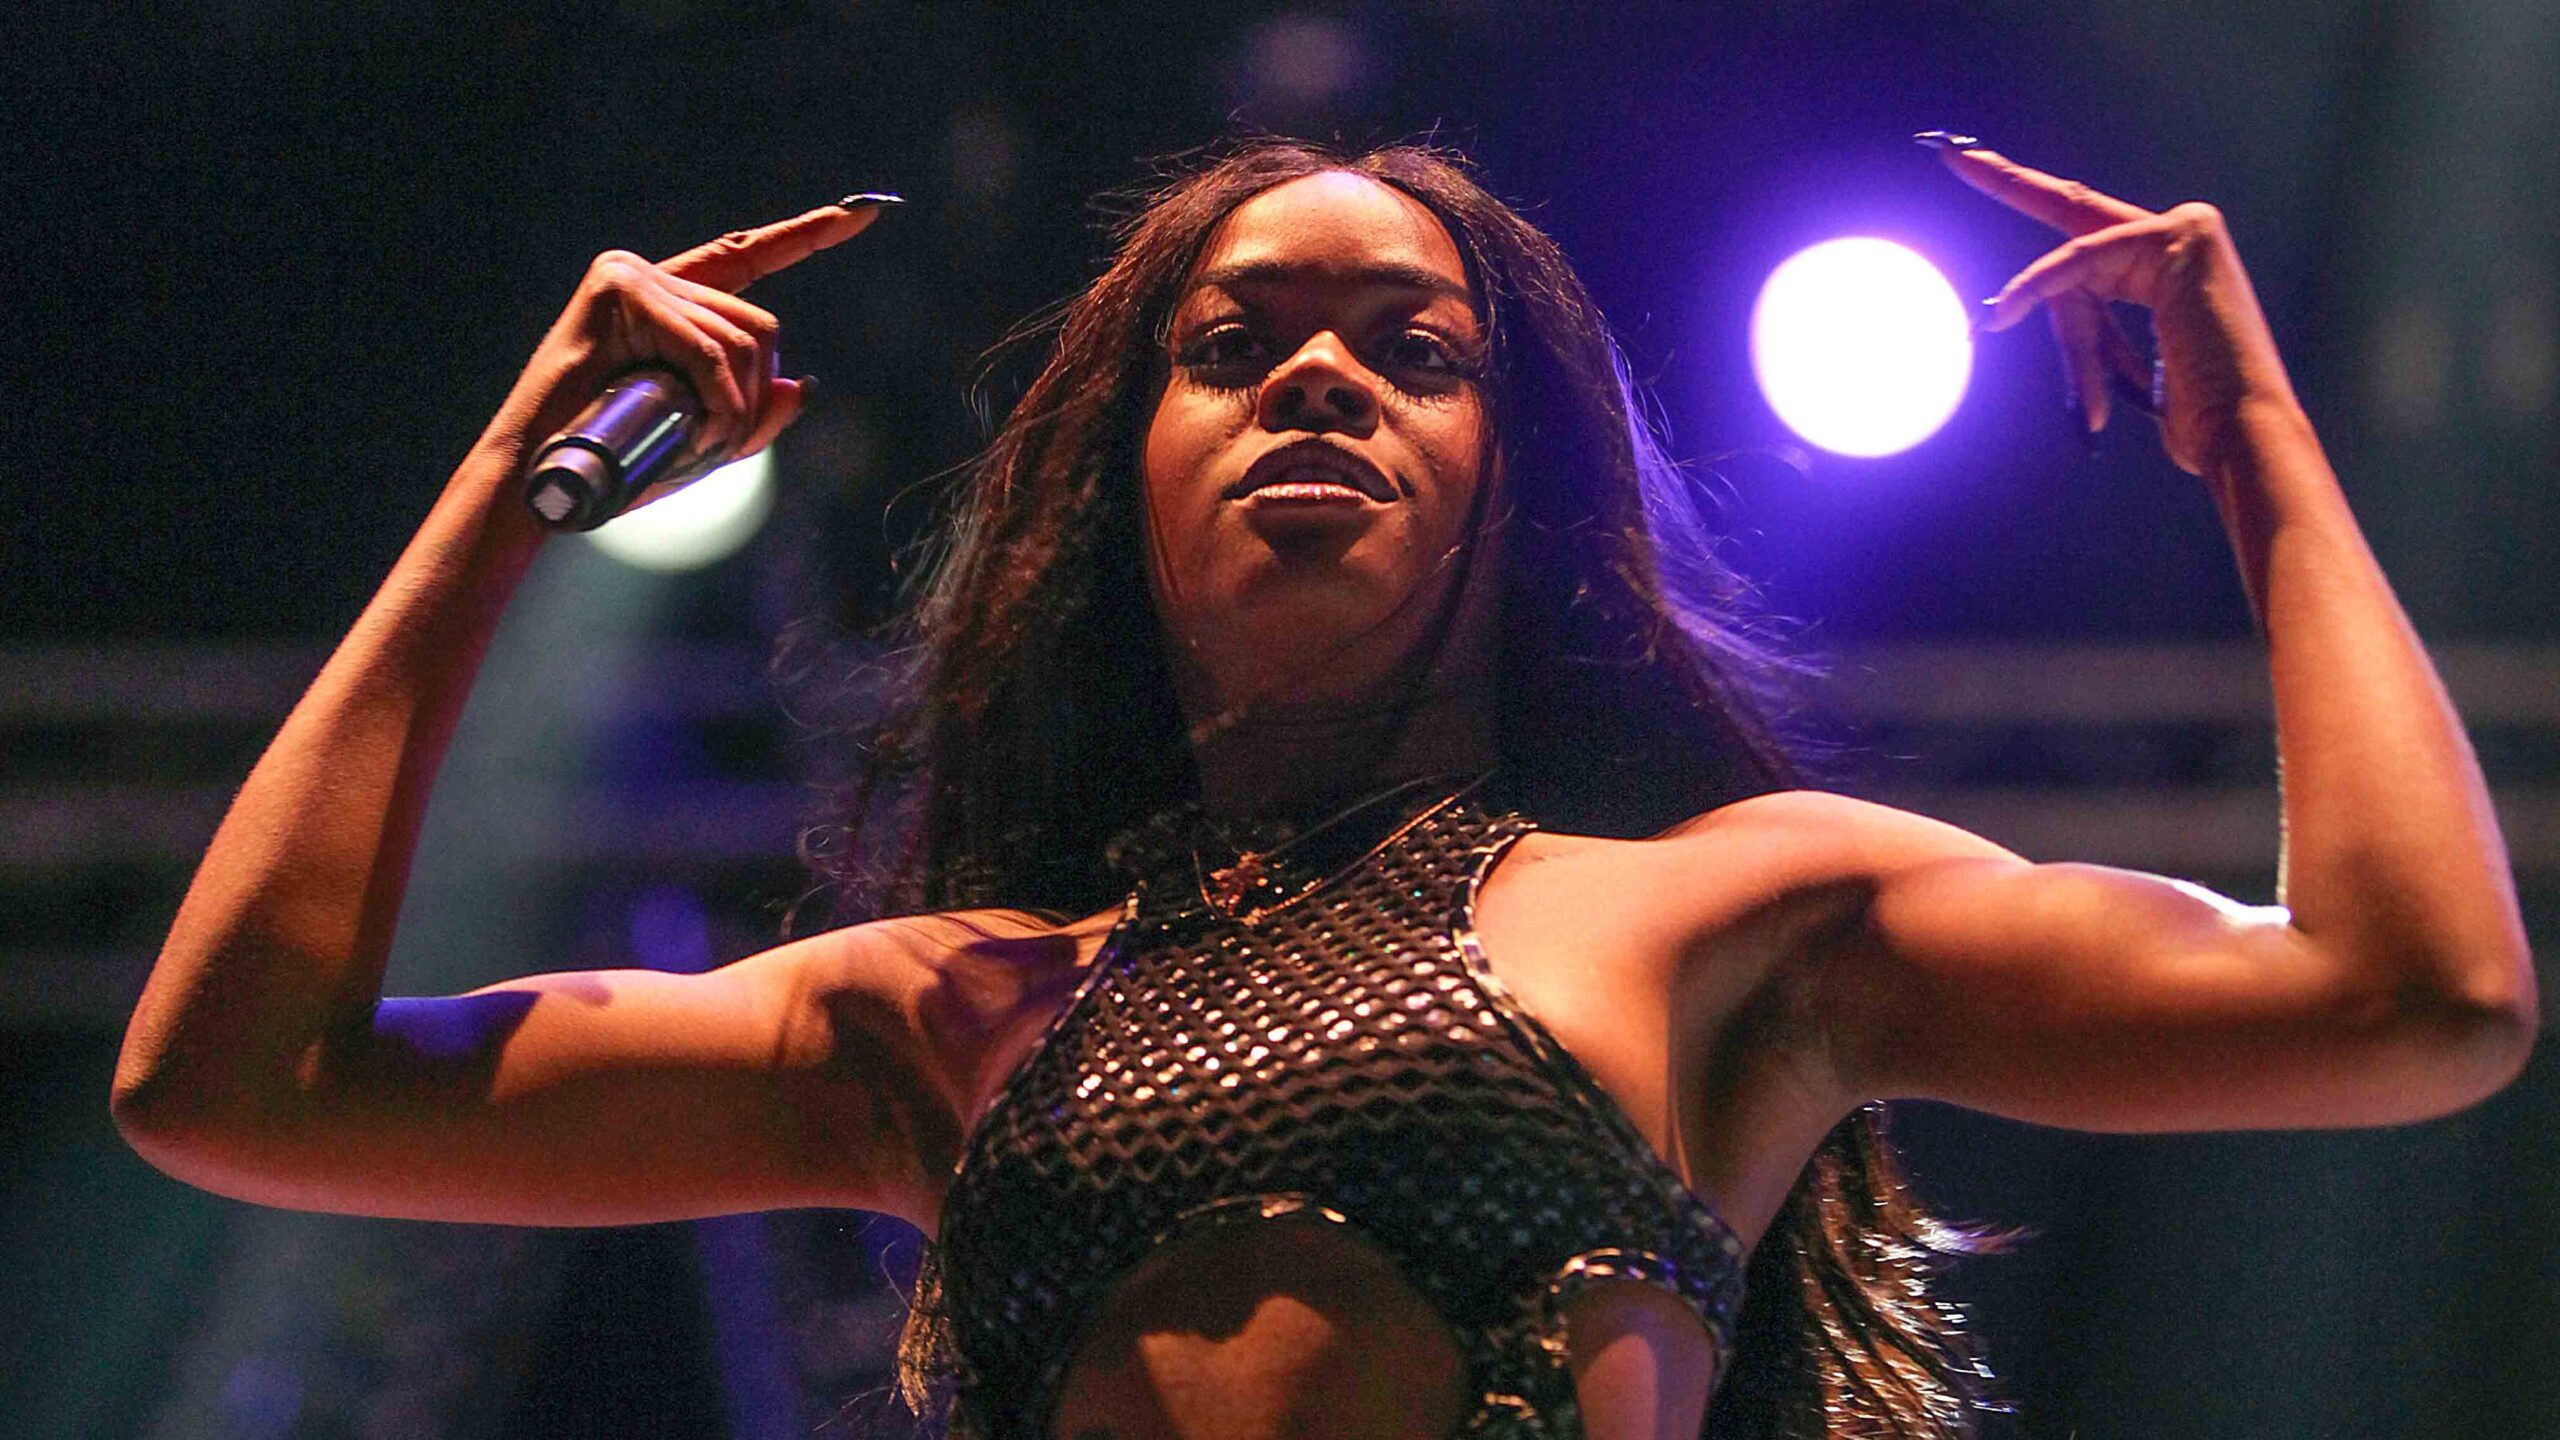 Twitter suspends rapper Azealia Banks after racist abuse